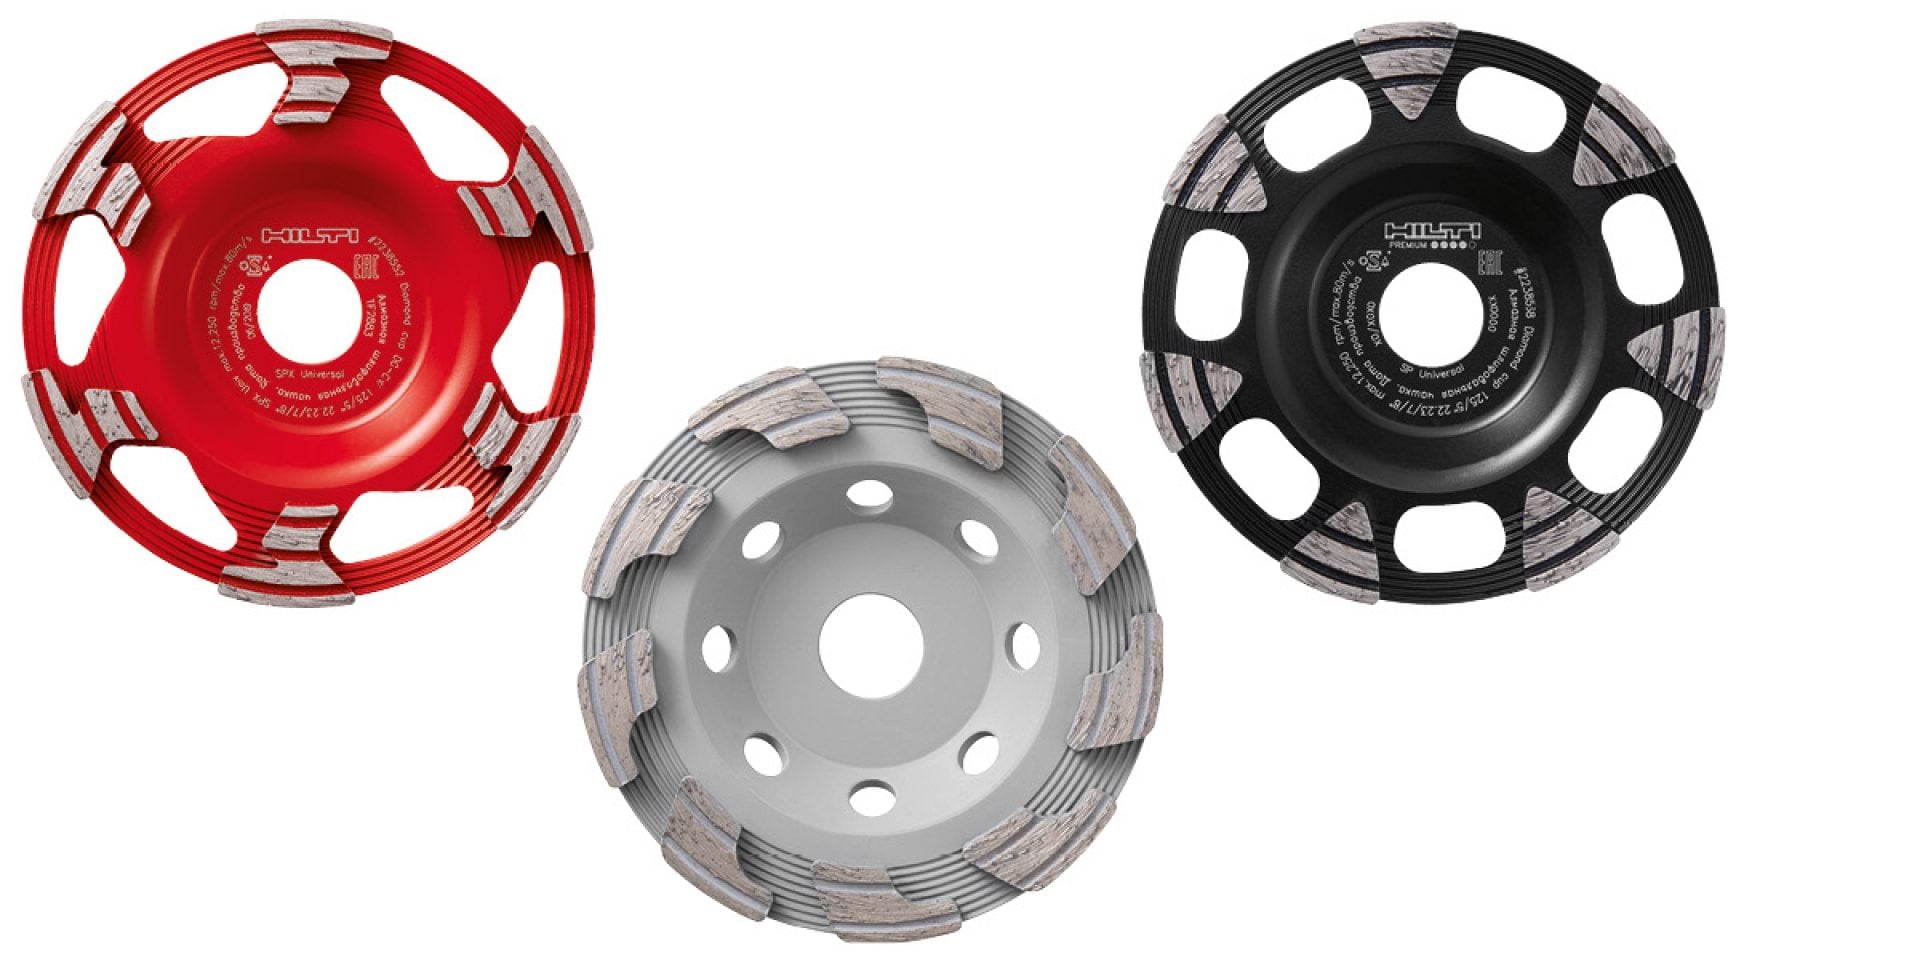 Cupwheels for grinding concrete